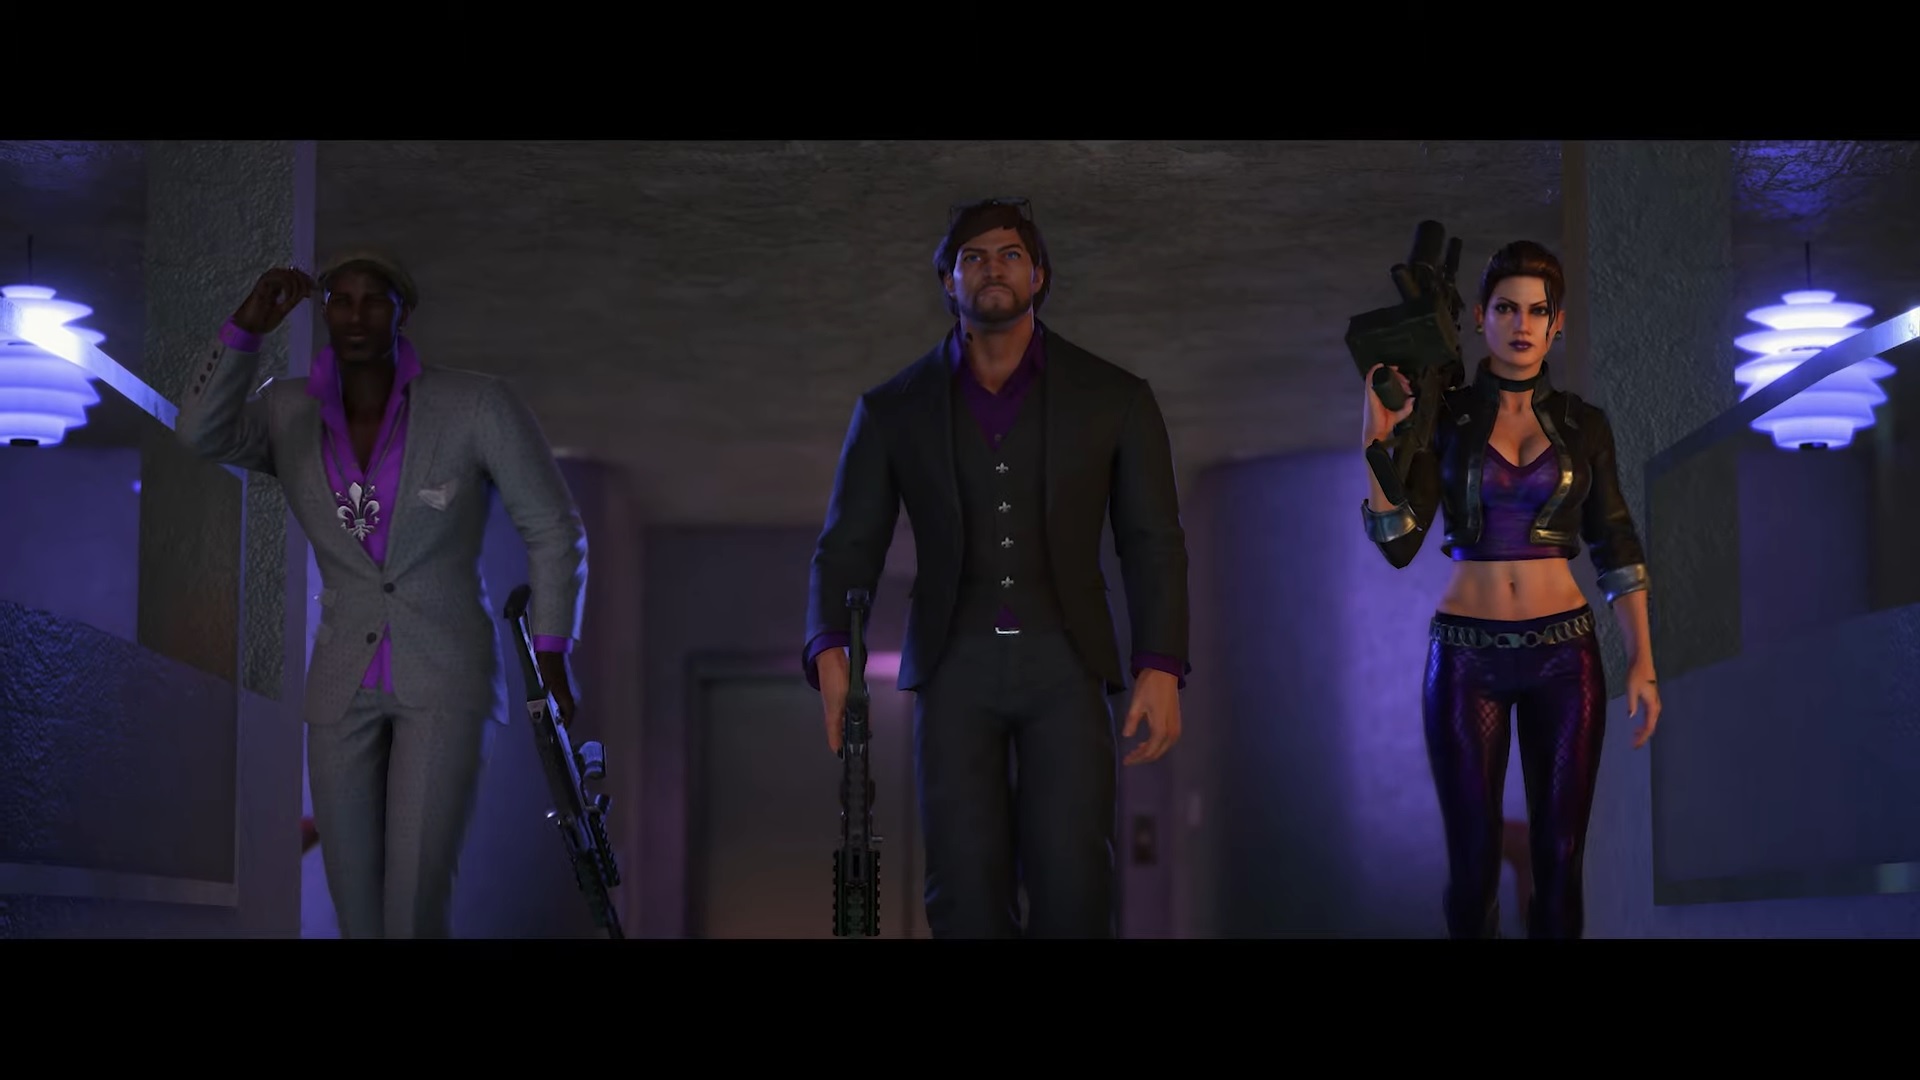 Saints Row: The Third Remastered announced for PS4, Xbox One, and